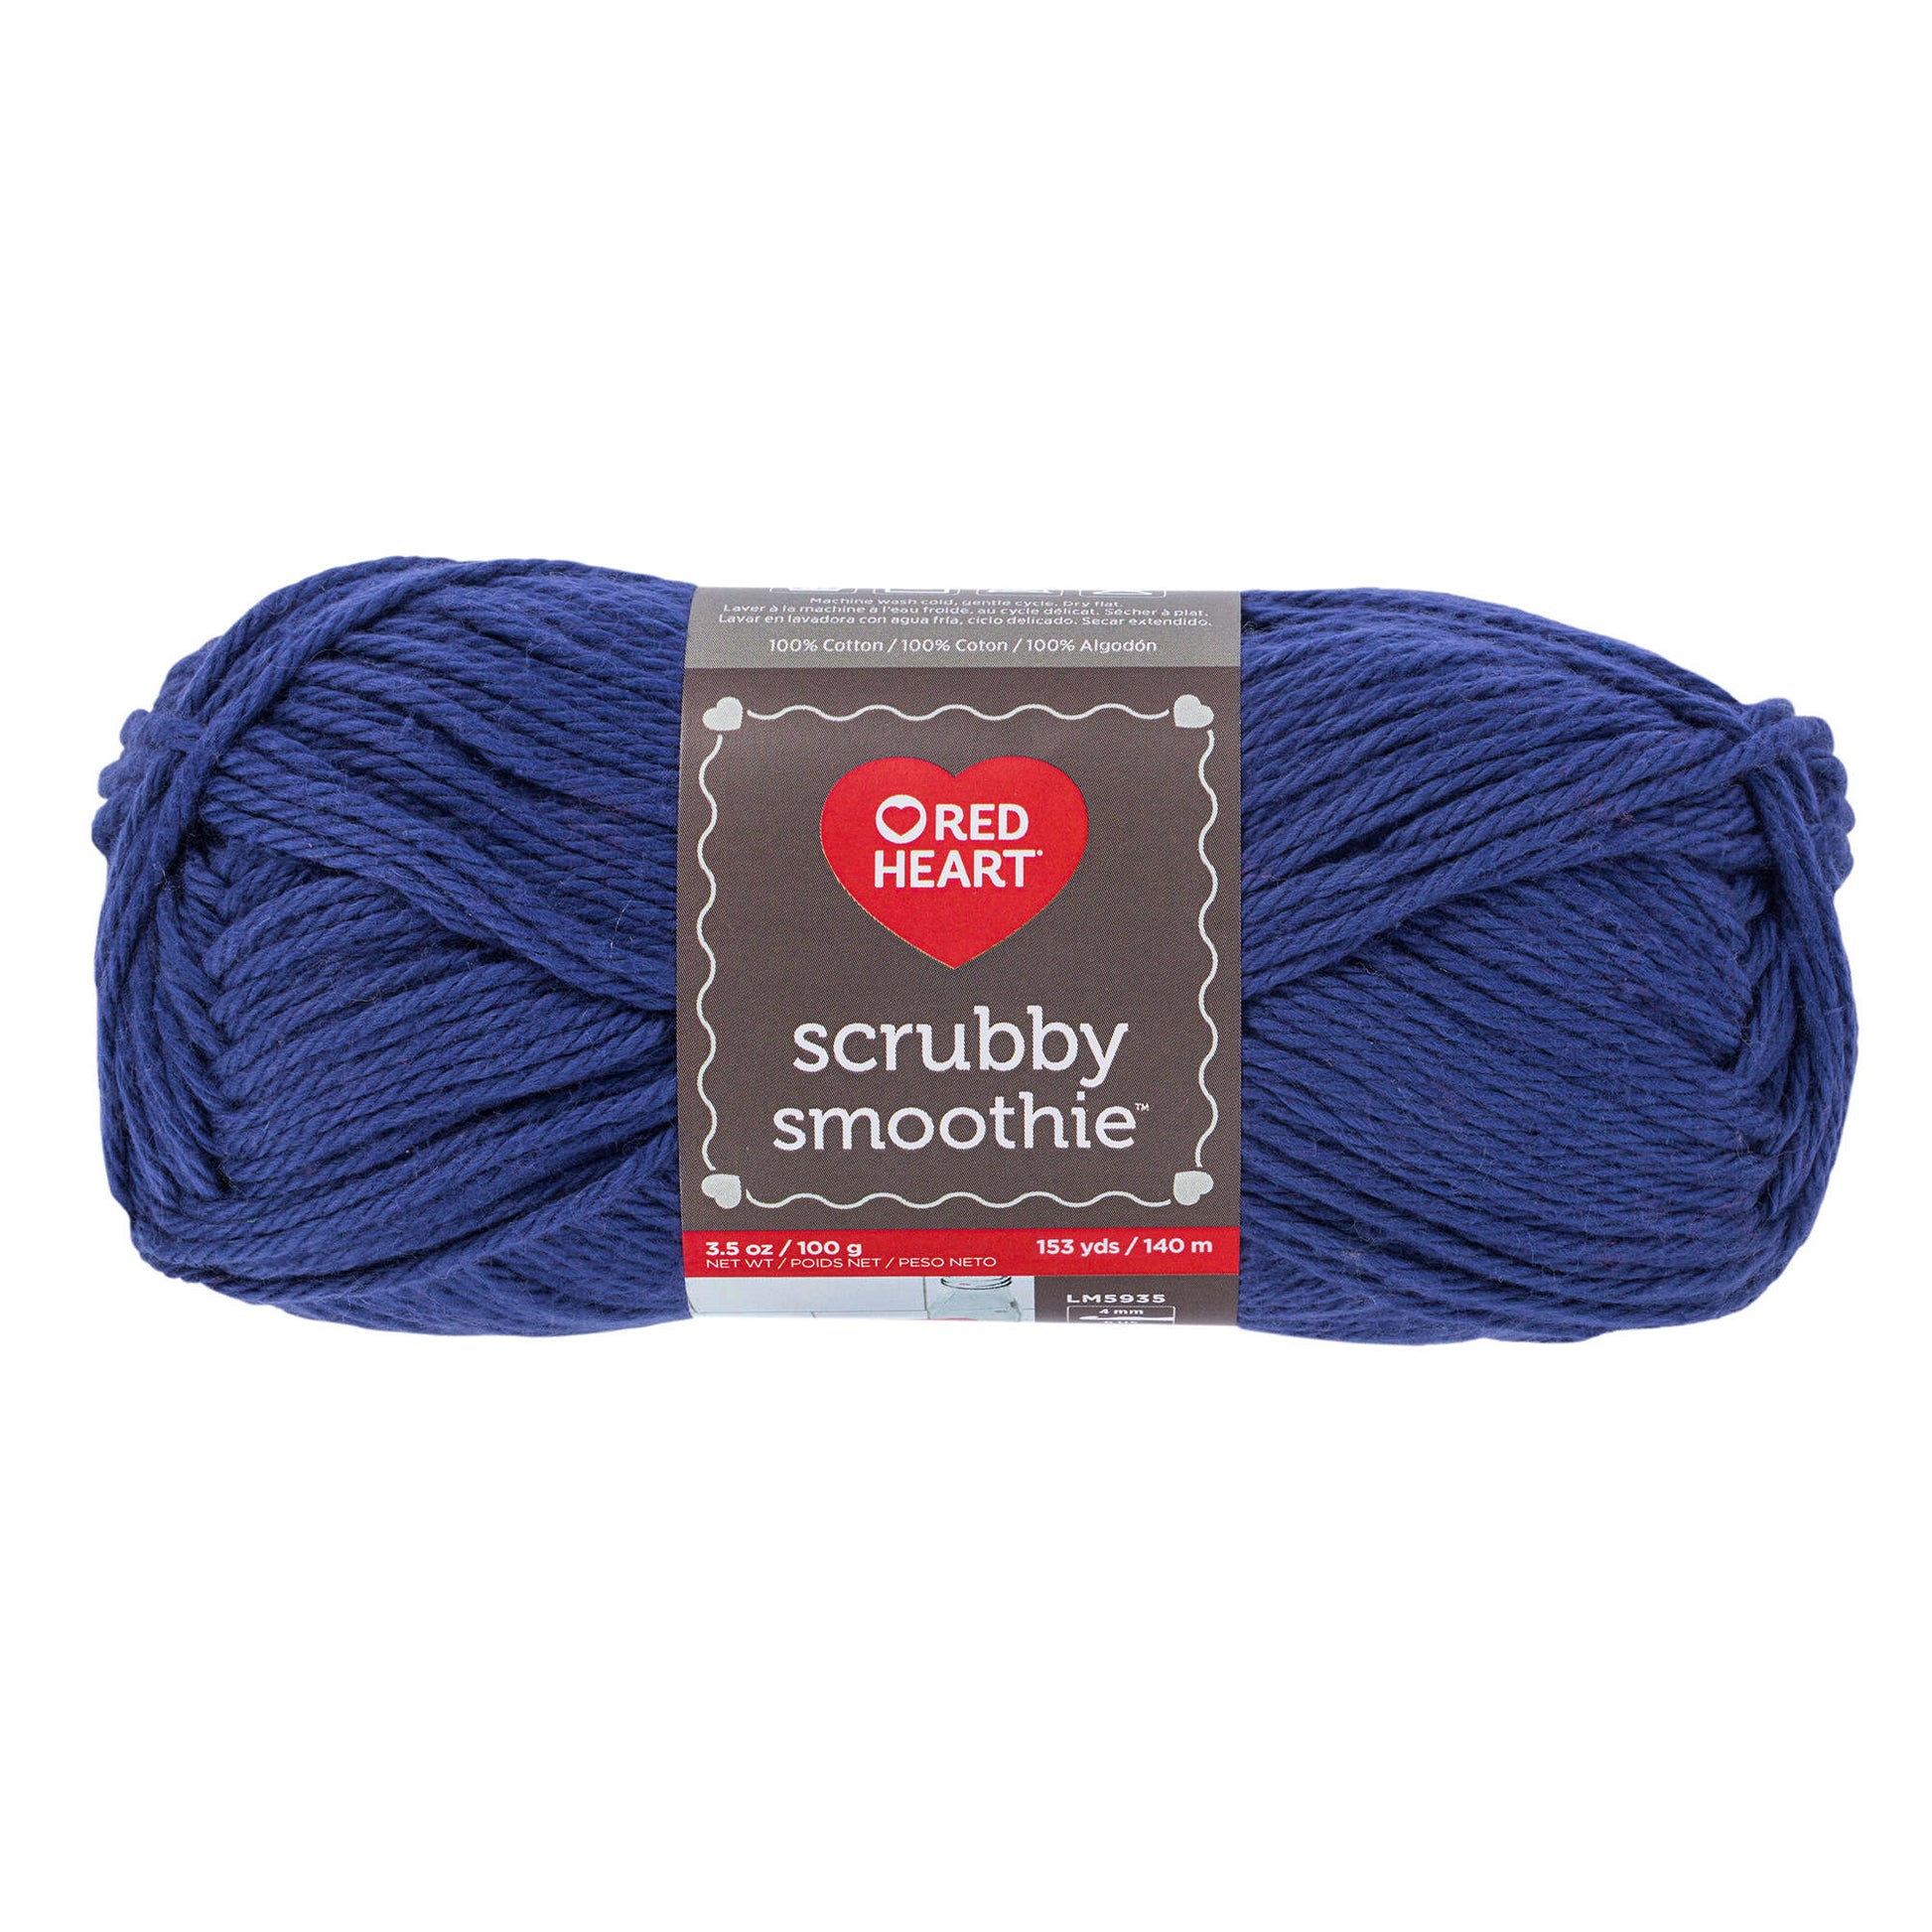 Red Heart Scrubby Smoothie Yarn - Clearance shades Blueberry